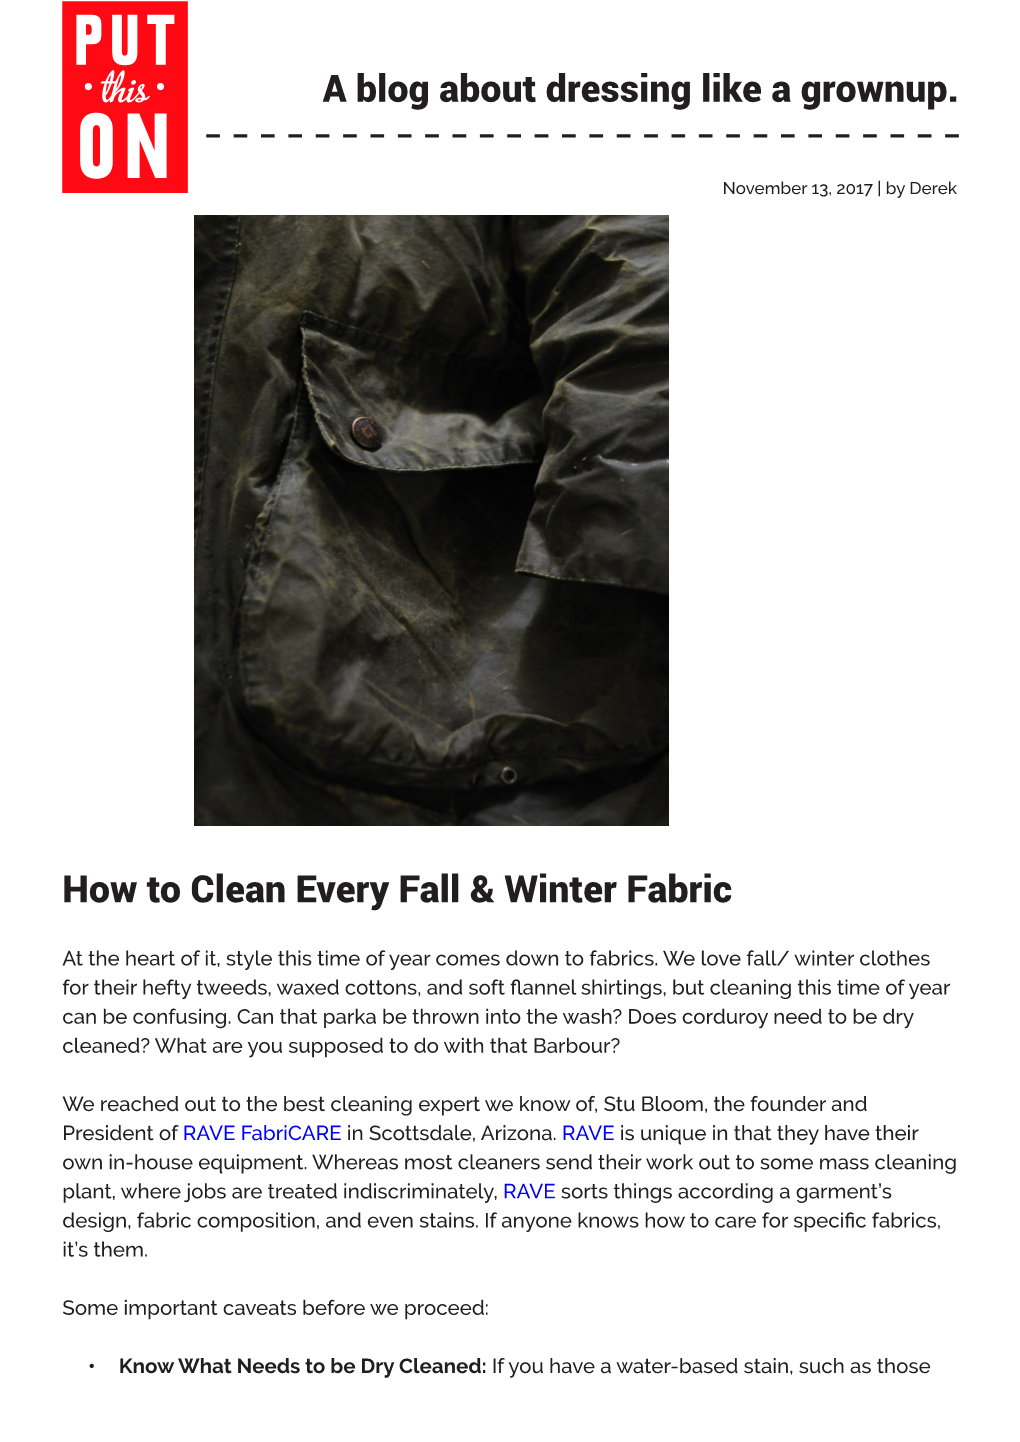 A Blog About Dressing Like a Grownup. How to Clean Every Fall & Winter Fabric